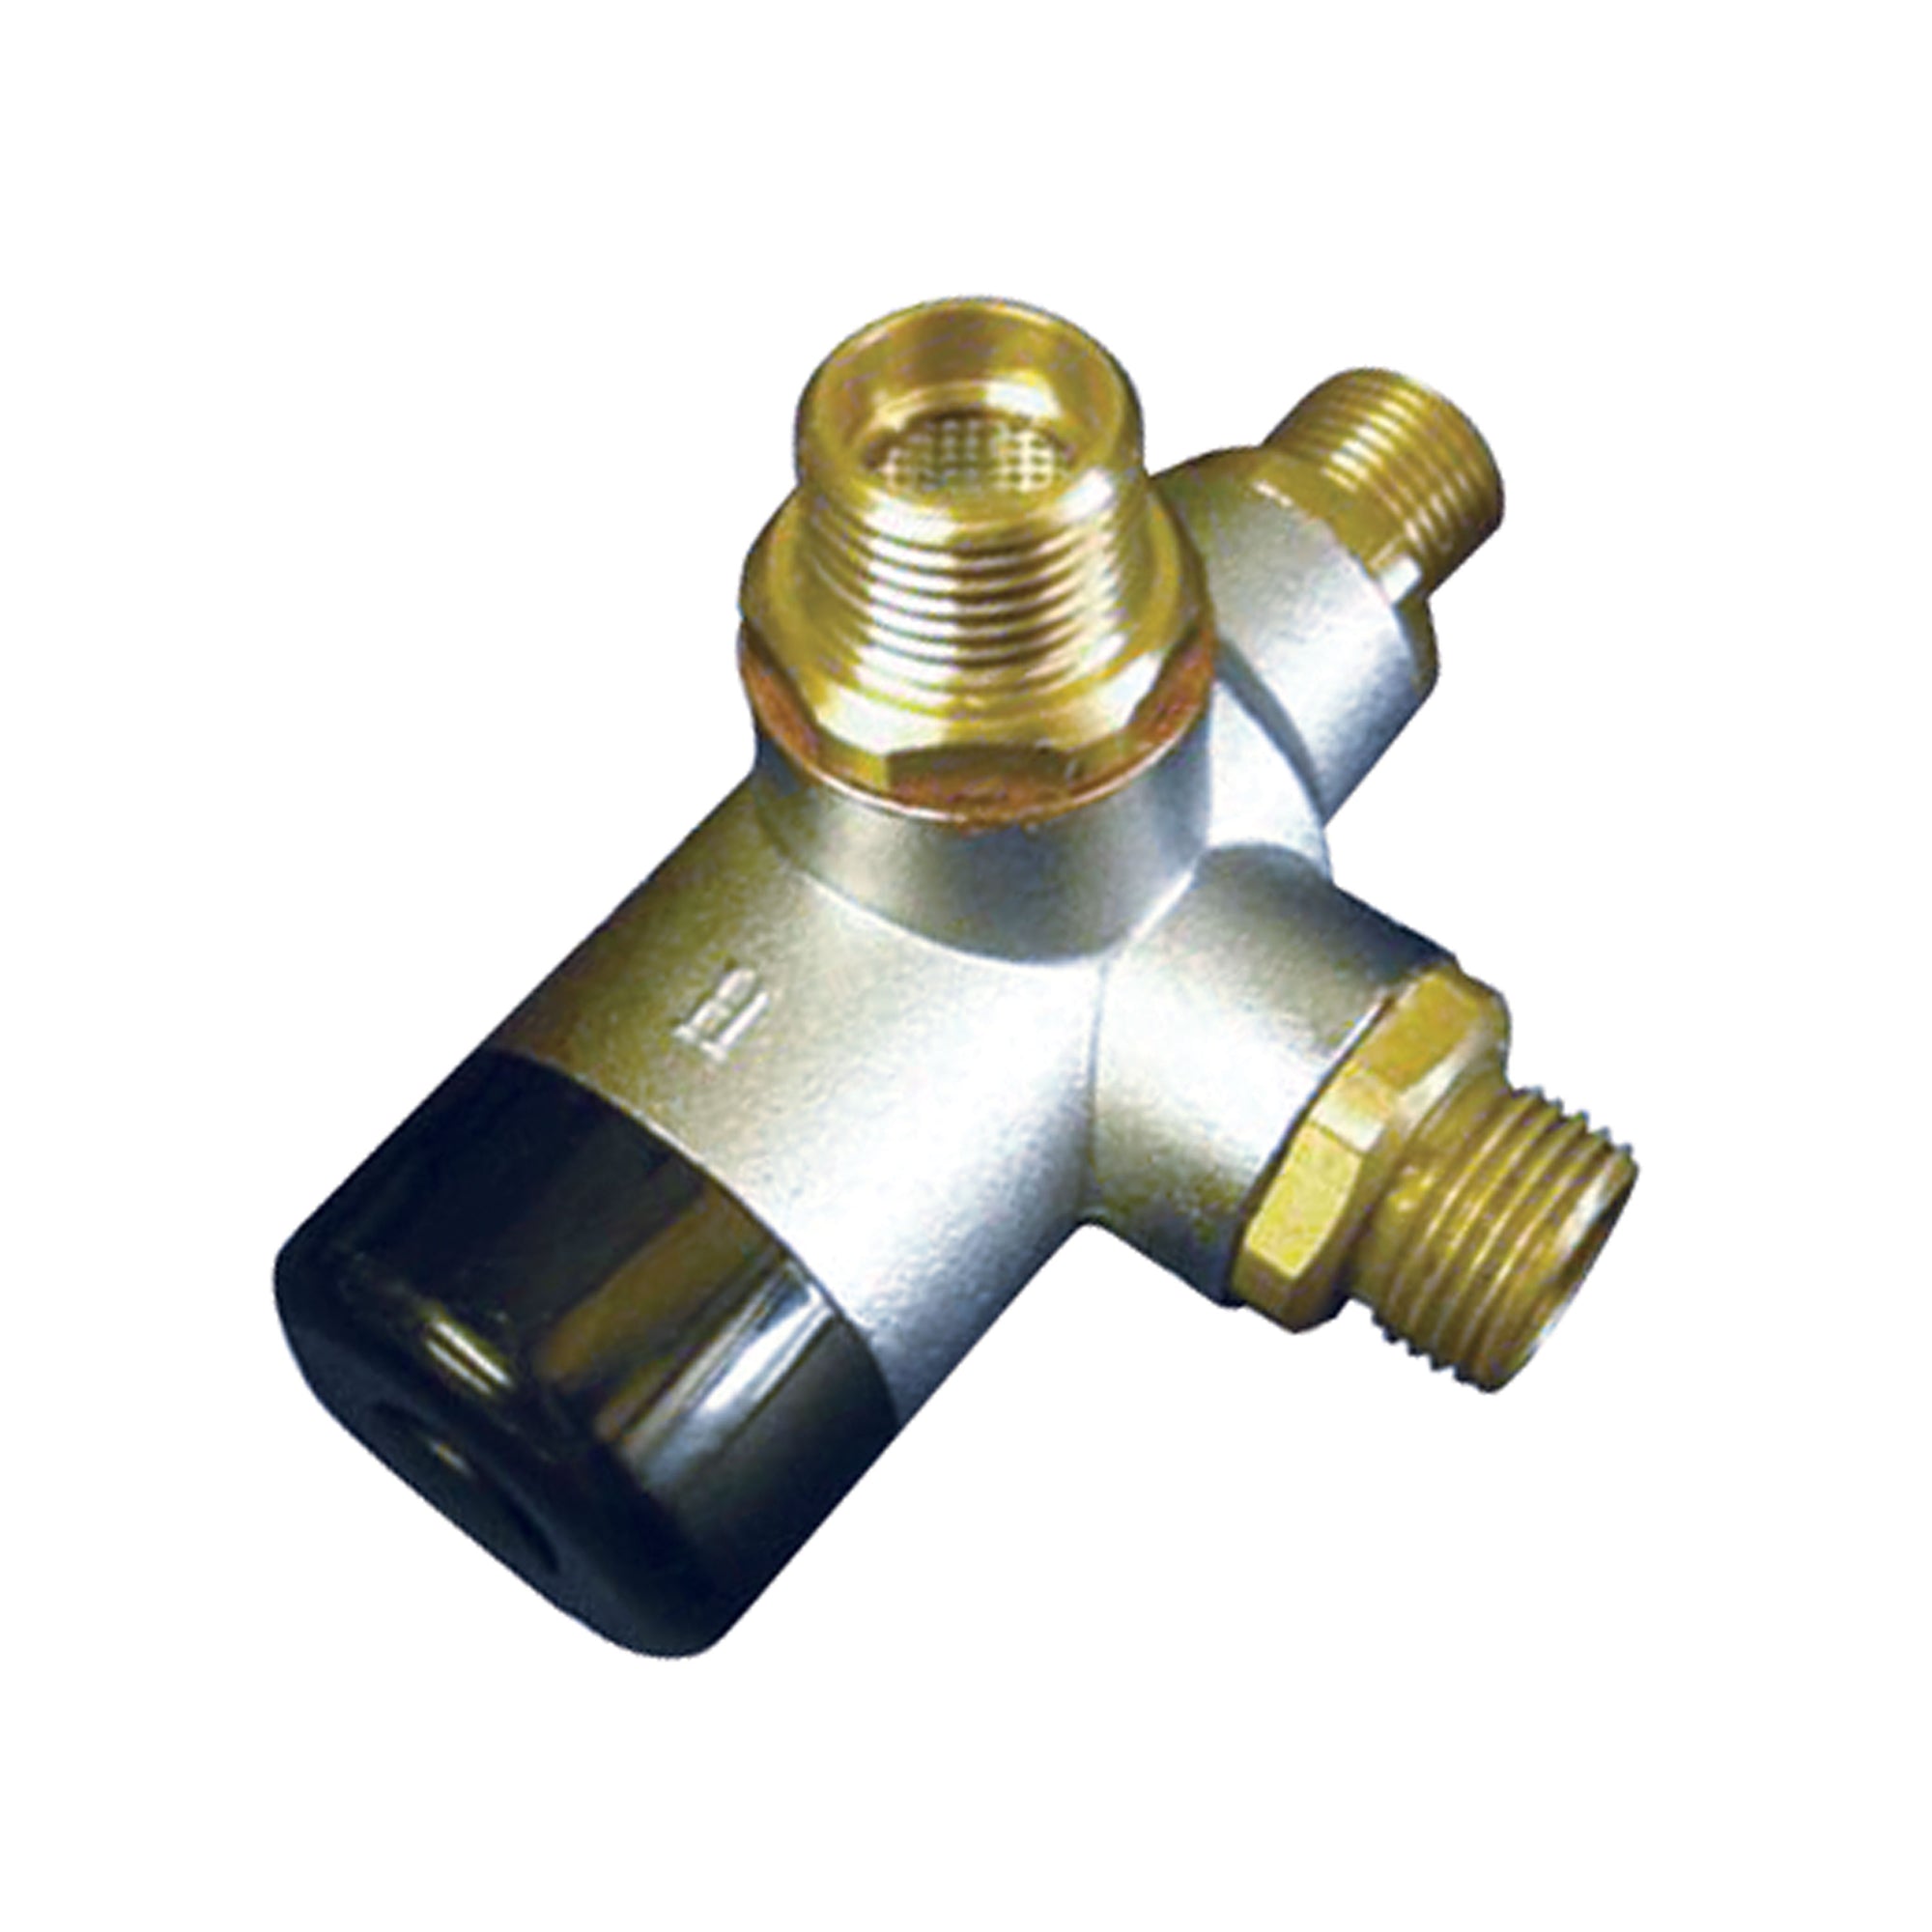 Atwood 90029 Mixing Valve for Xt Series Water Heaters